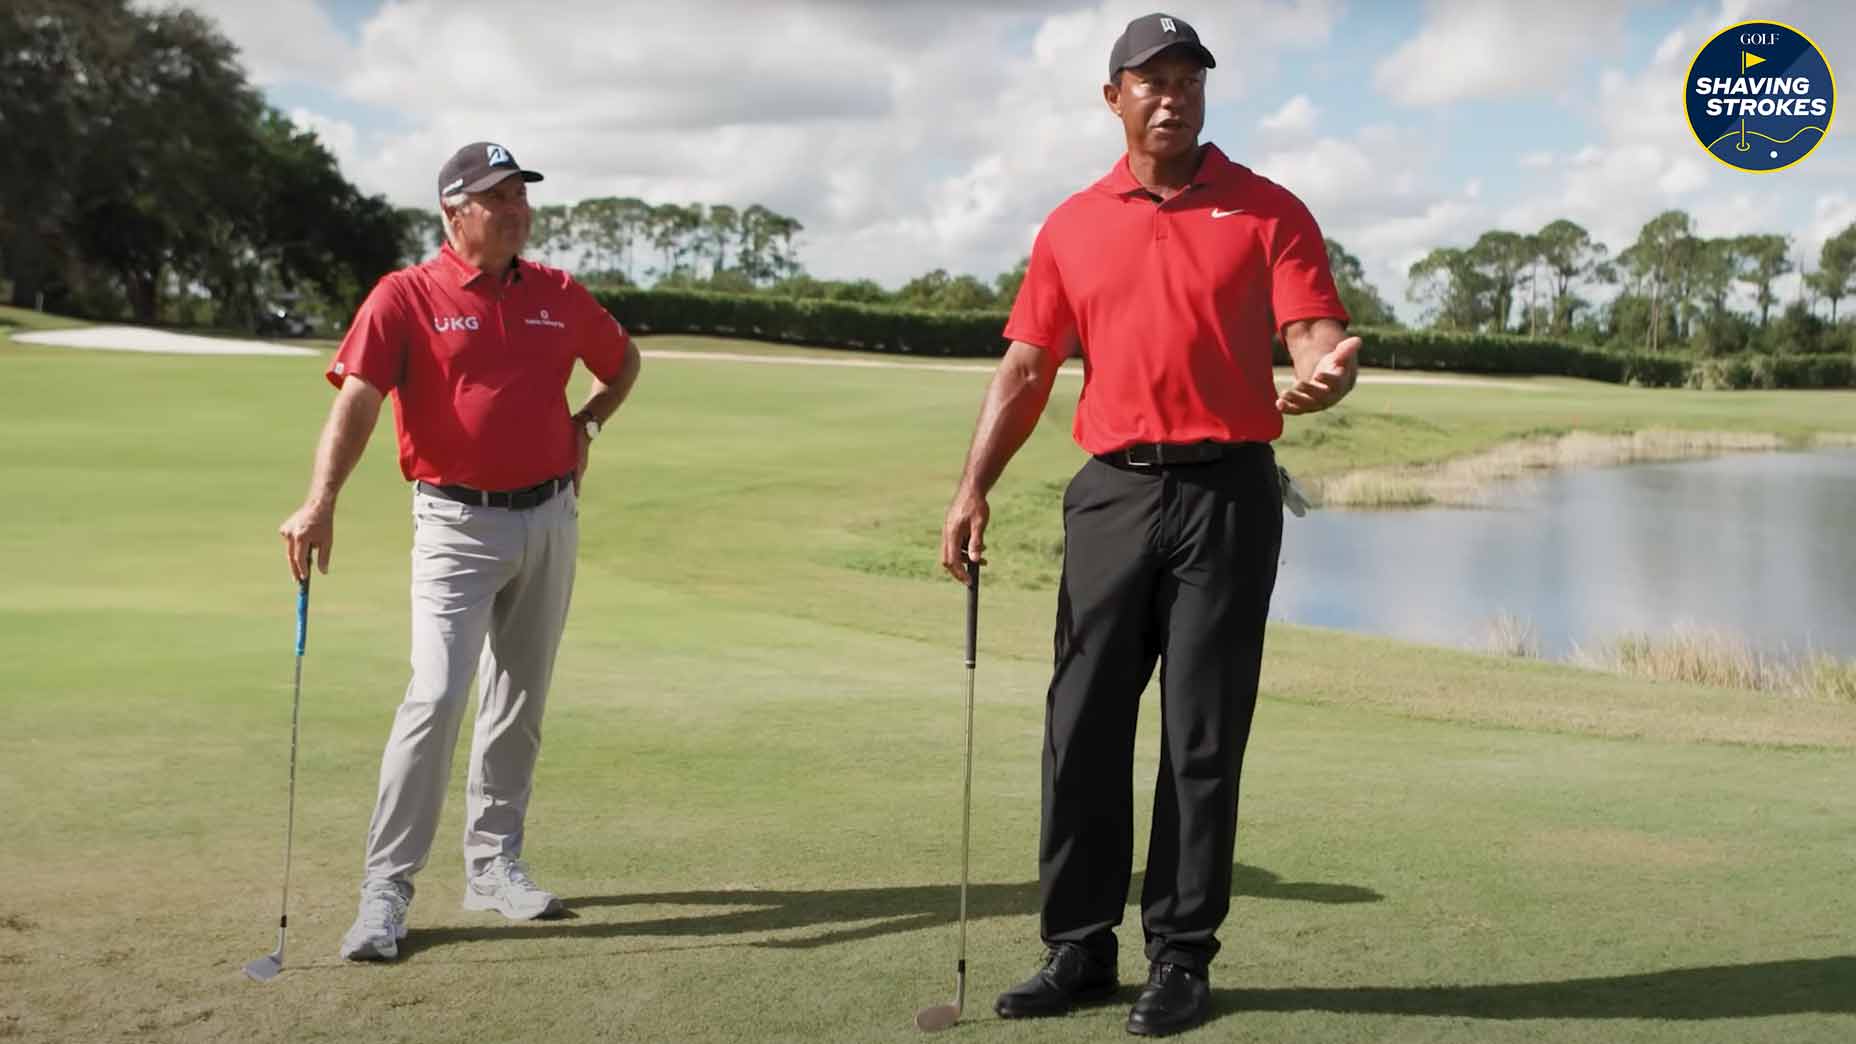 In a video for PGA Tour Superstore, Tiger Woods shares the secrets for hitting his famous draw chip with Fred Couples